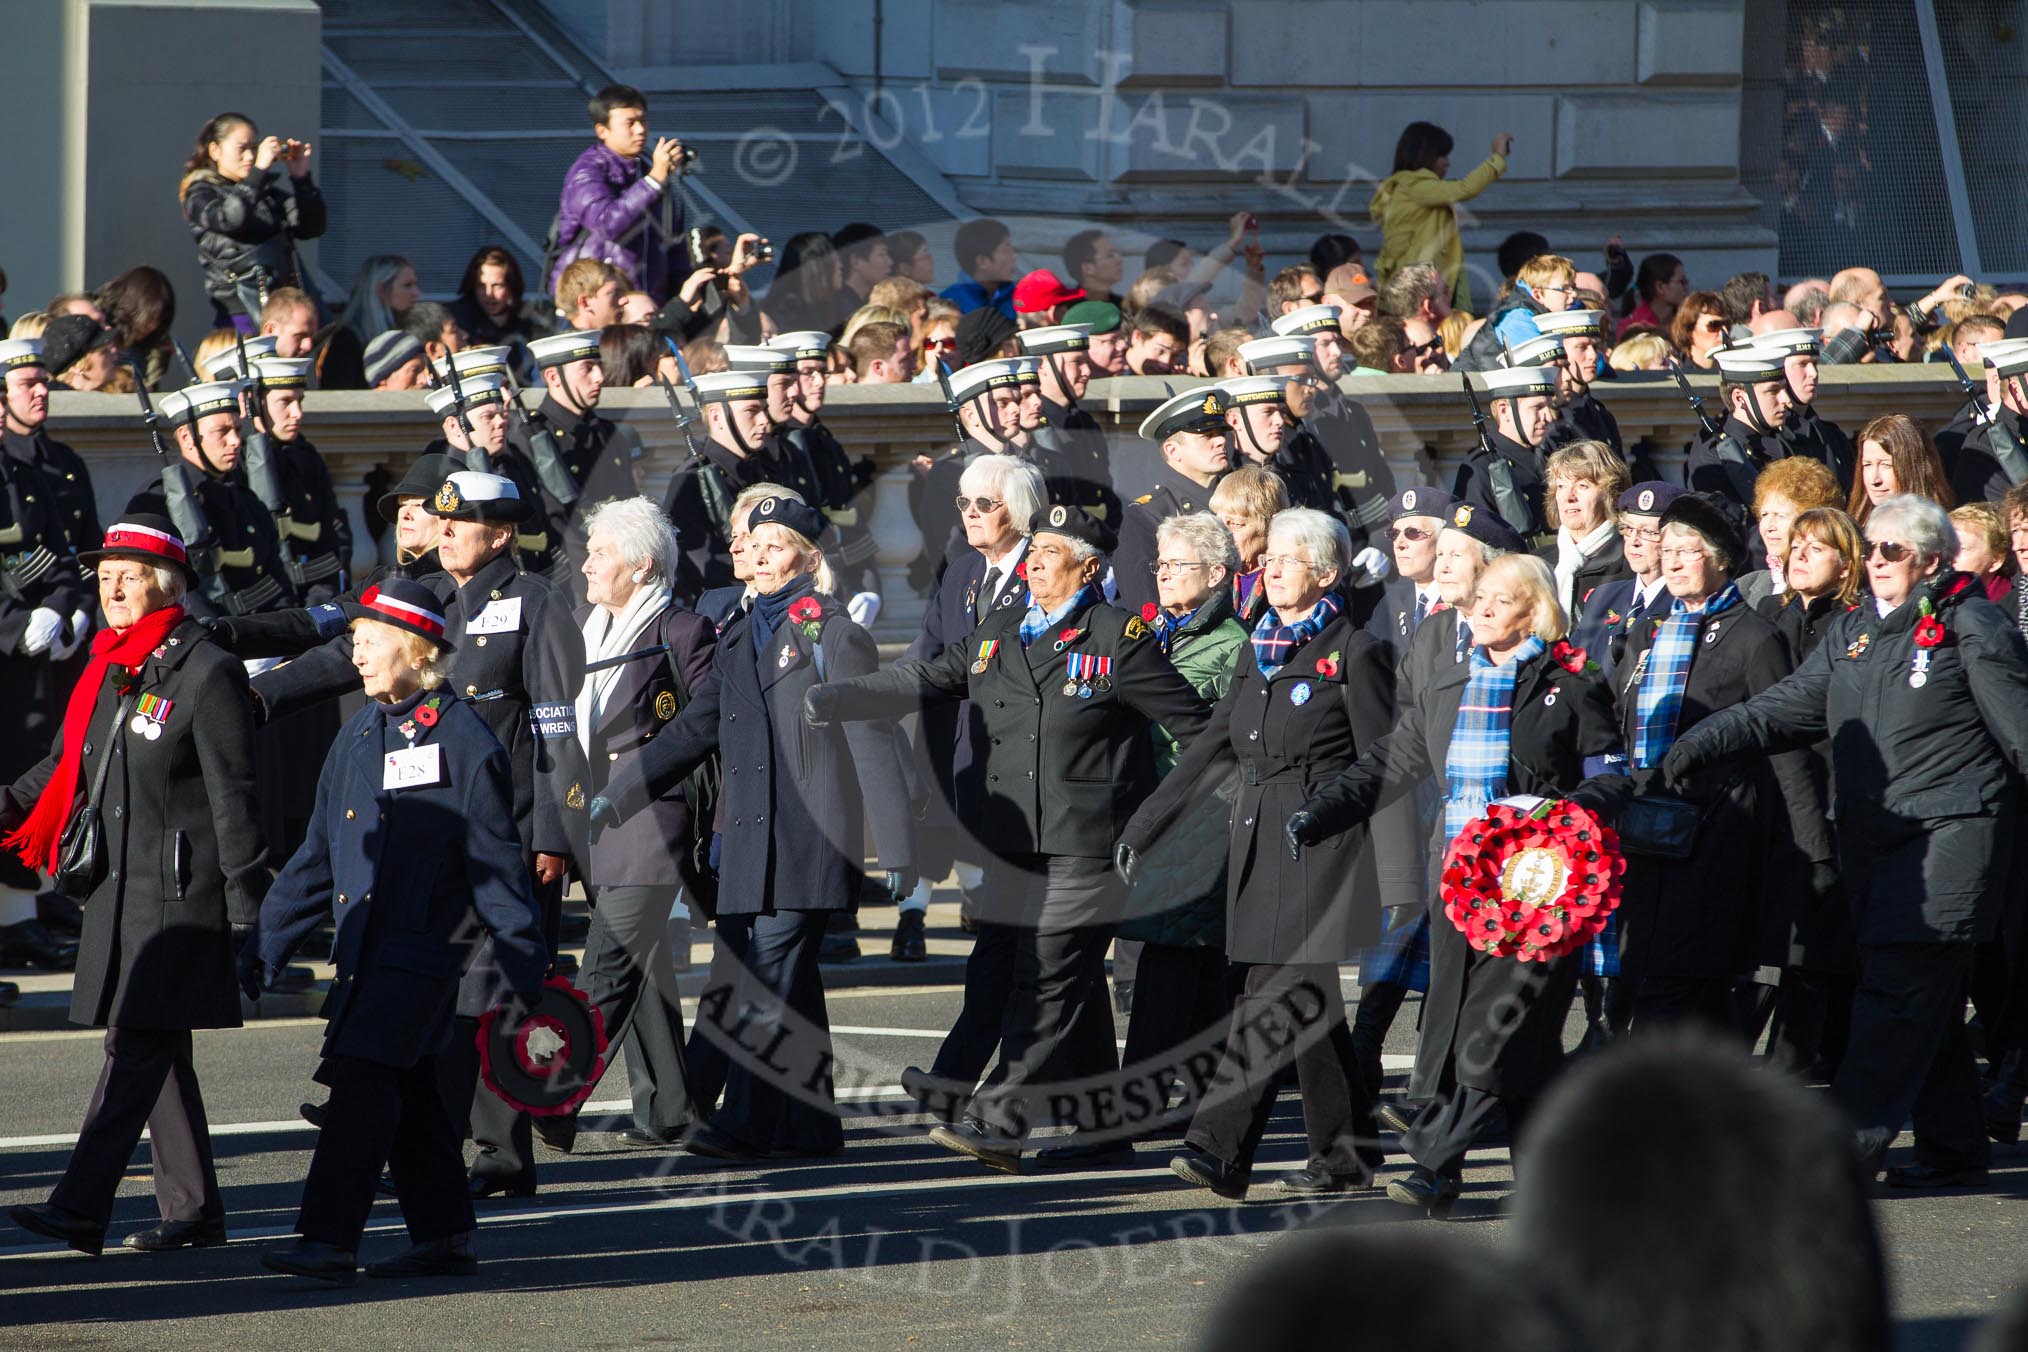 Remembrance Sunday 2012 Cenotaph March Past: Group E28 - VAD RN Association and E29 - Association of WRENS..
Whitehall, Cenotaph,
London SW1,

United Kingdom,
on 11 November 2012 at 11:41, image #201